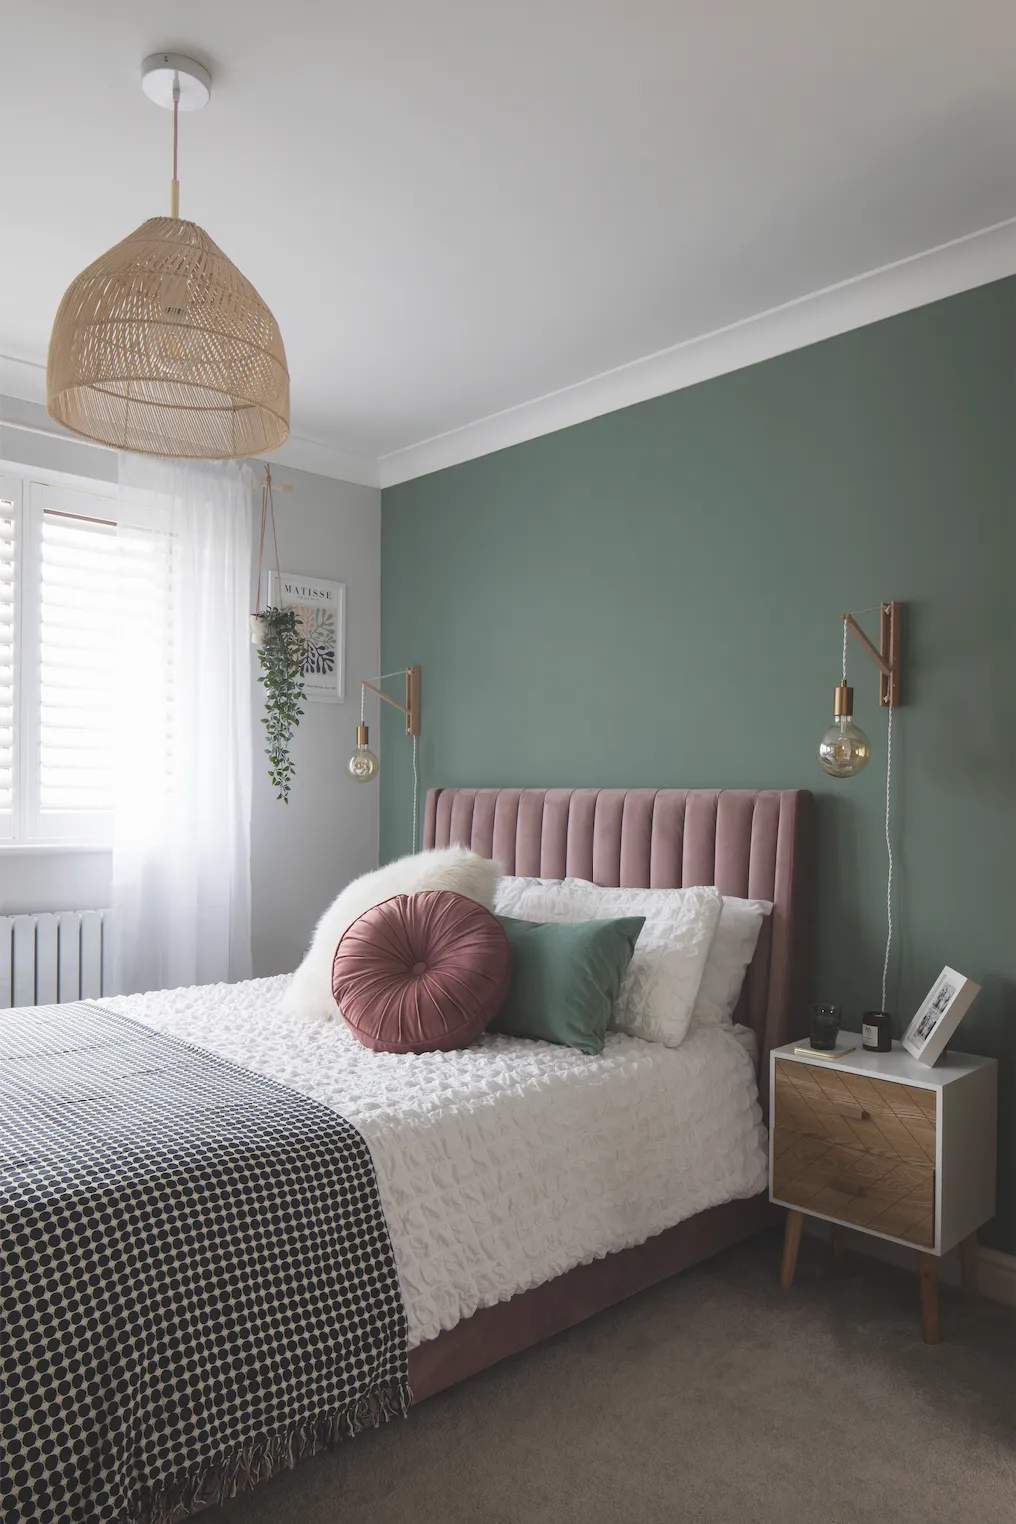 Becca’s bedroom centrepiece is her velvet bed, which makes the room feel ultra-luxurious. ‘The dusty pink bed was inspired by @lustliving and I knew it would look lovely against the green wall,’ she says